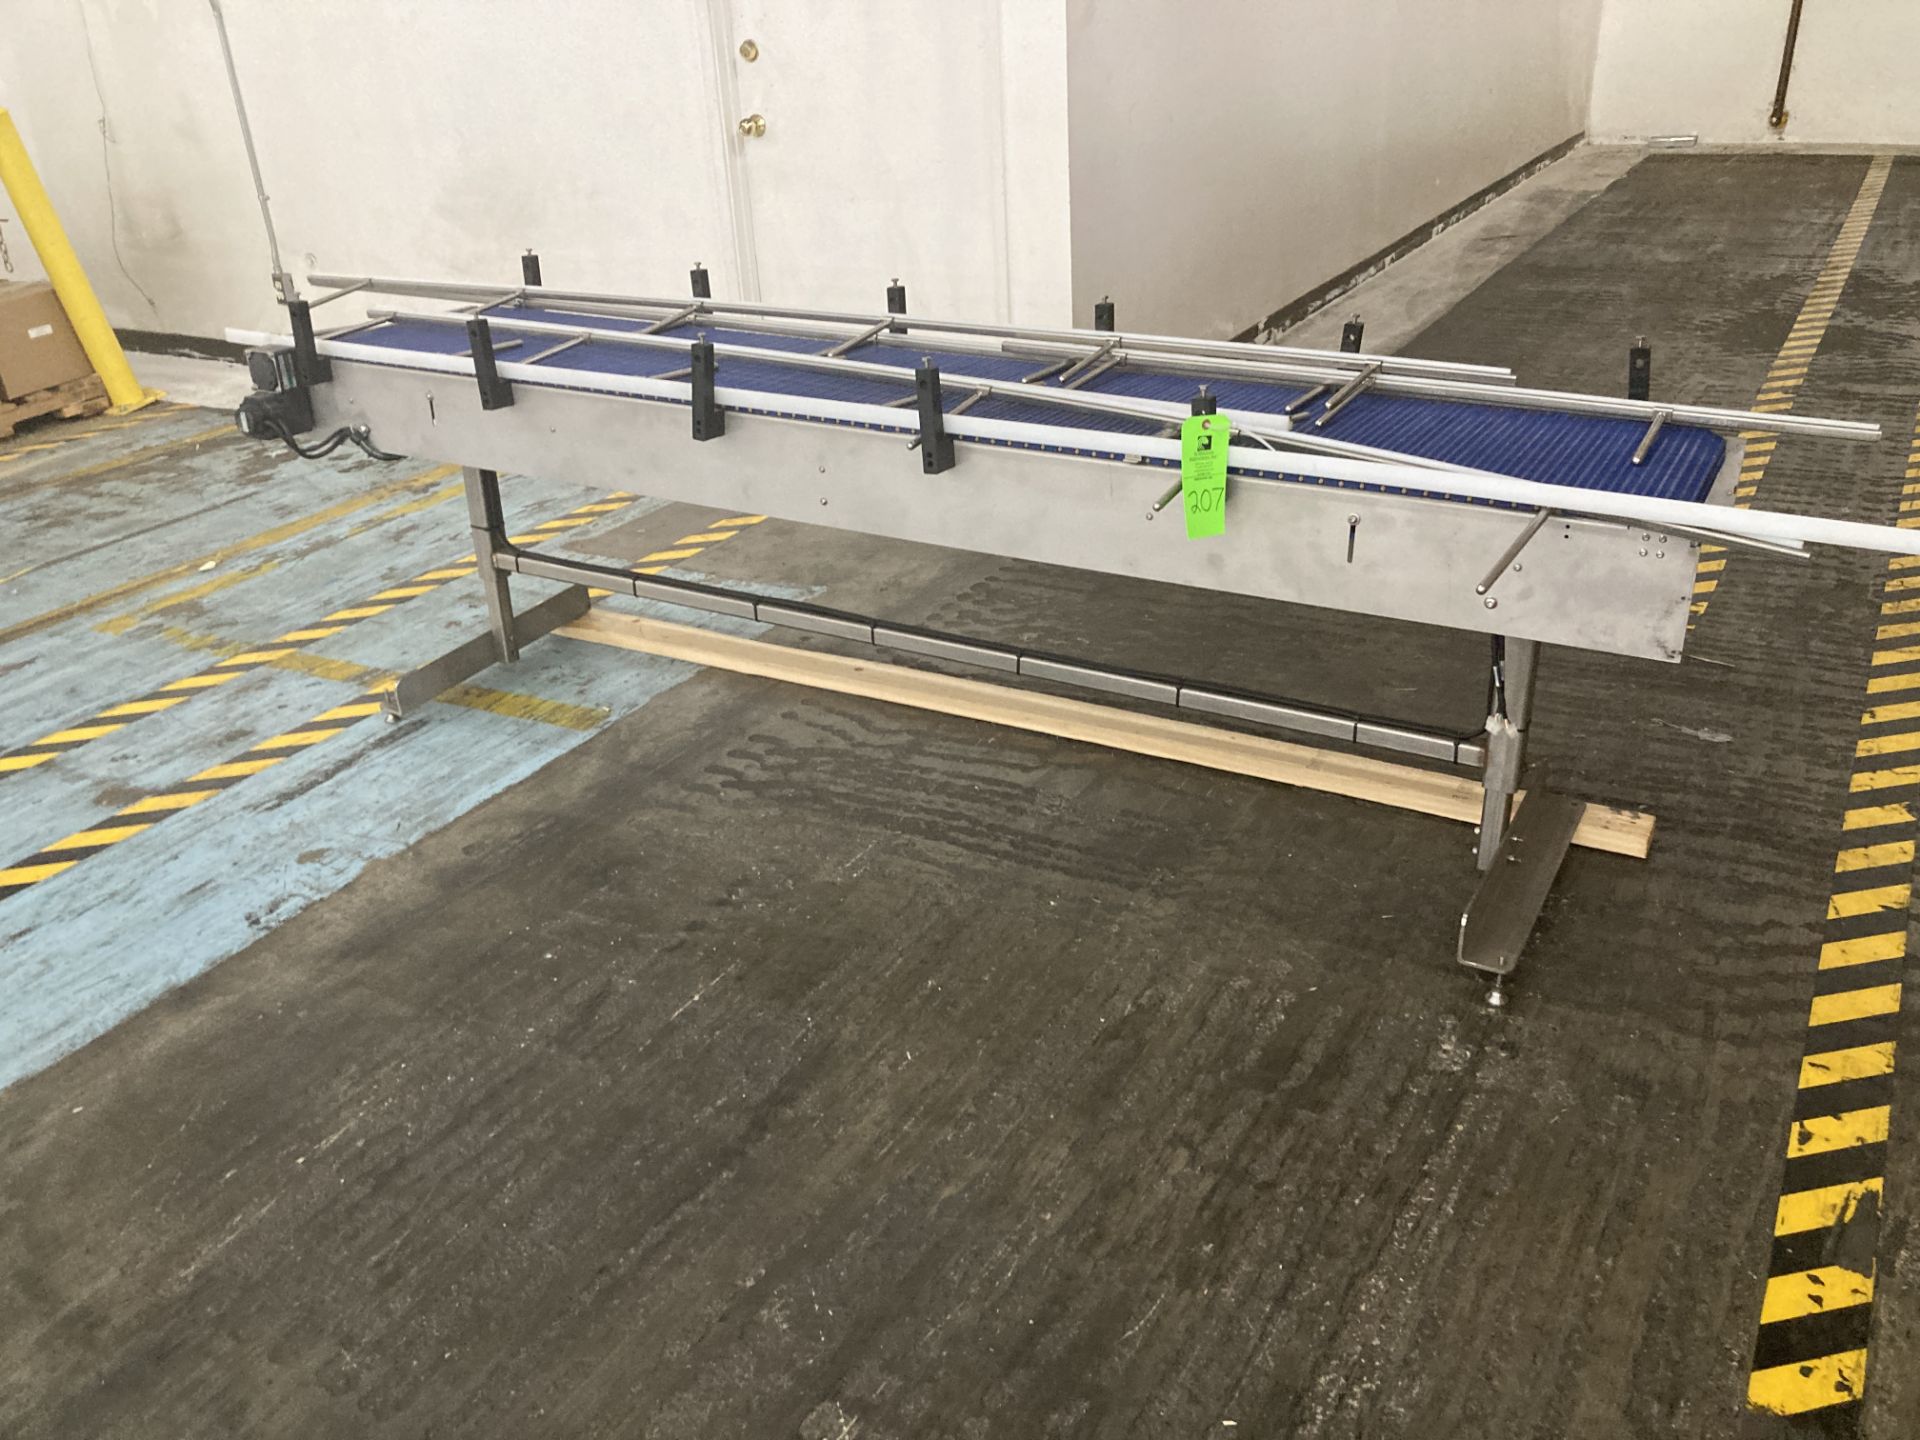 Stainless steel frame mattop conveyor system , 20 in w x 98 in lg Rigging Fee: $ 100